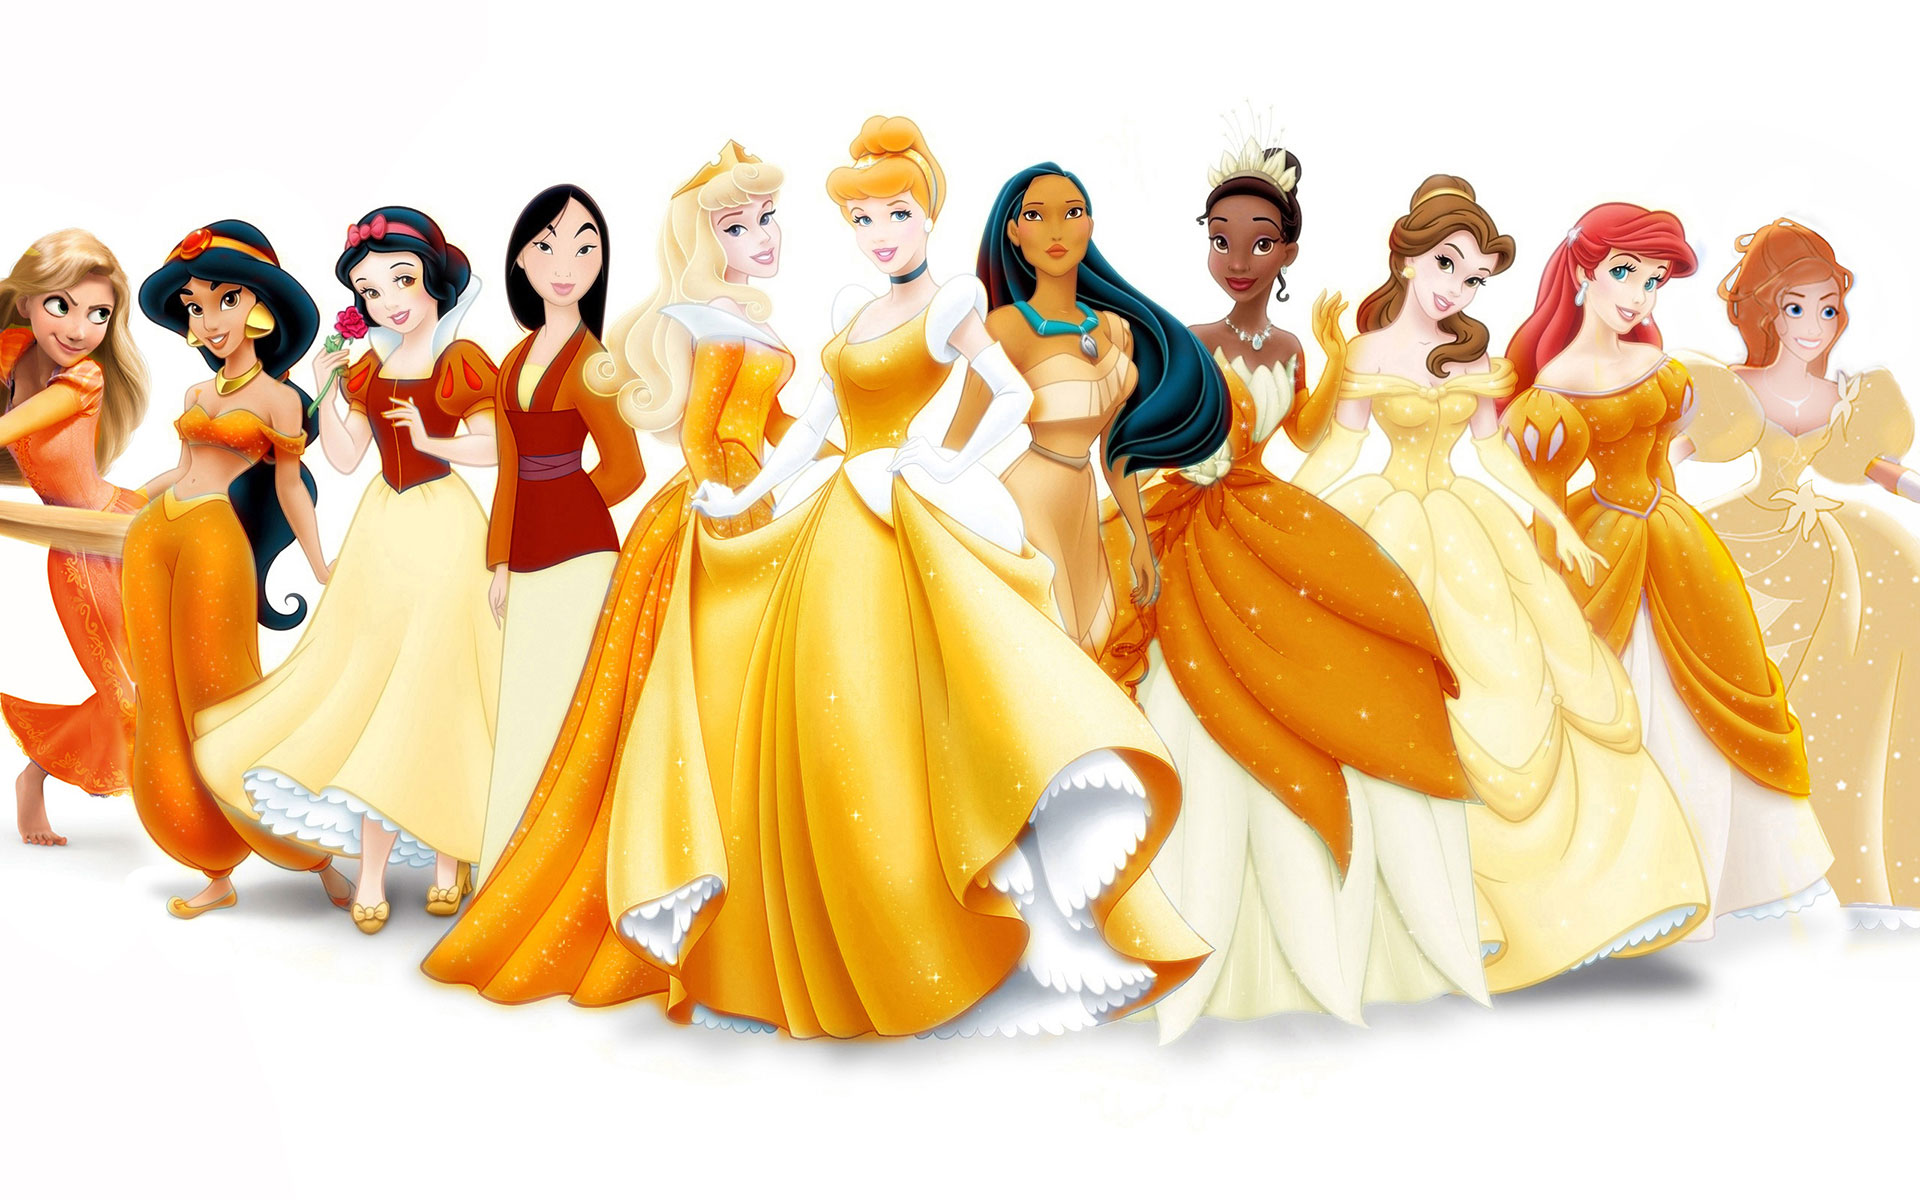 All Disney Princess Wallpaper Hd Images amp Pictures   Becuo